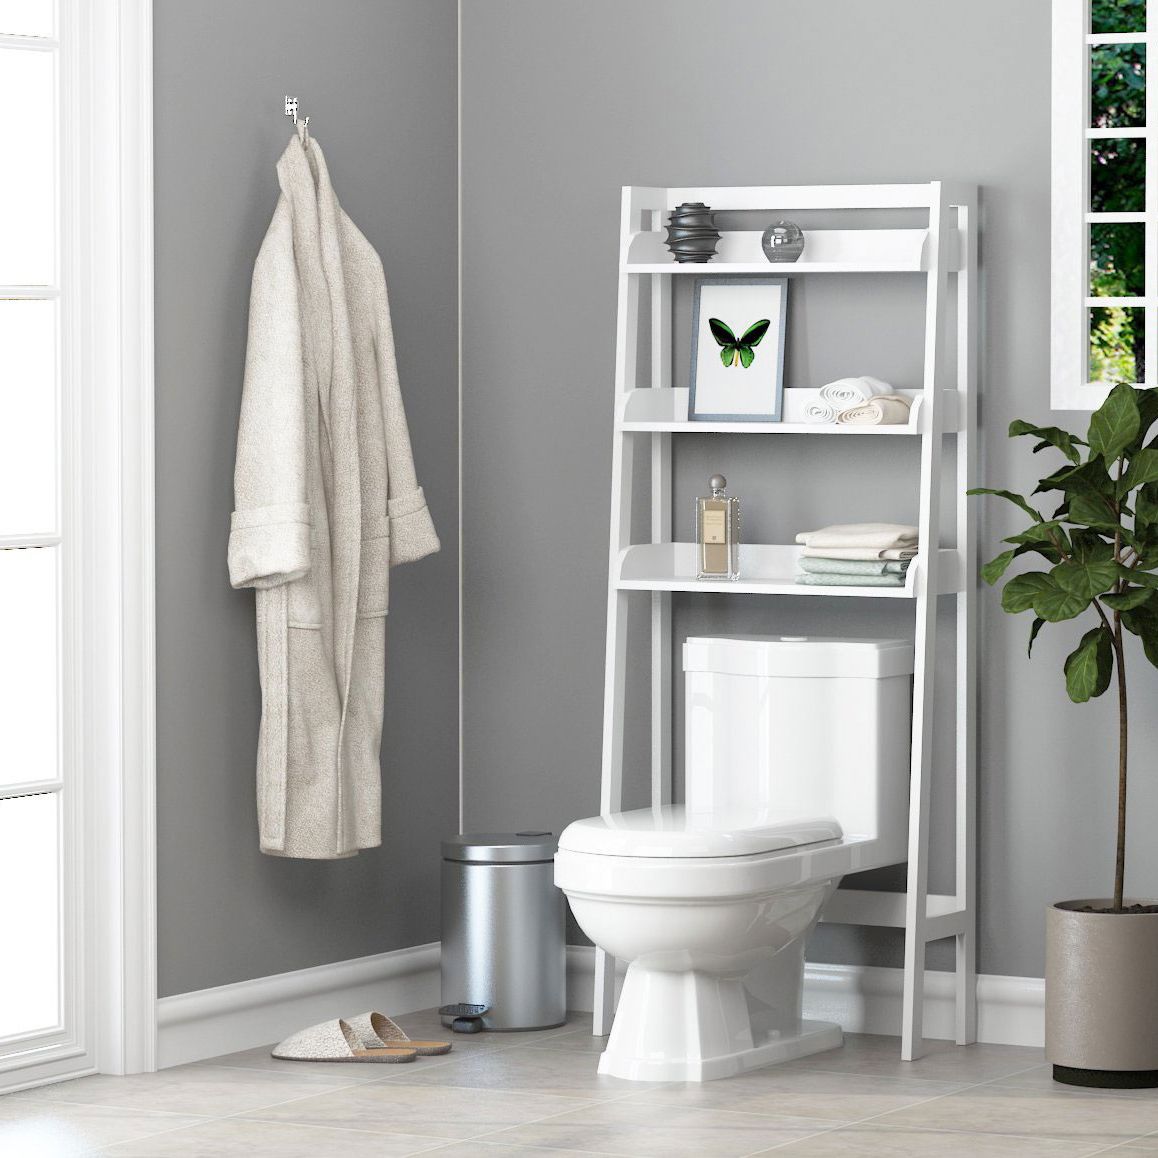 5 Best Over The Toilet Storage Ideas On, Towel Shelves Over Toilet